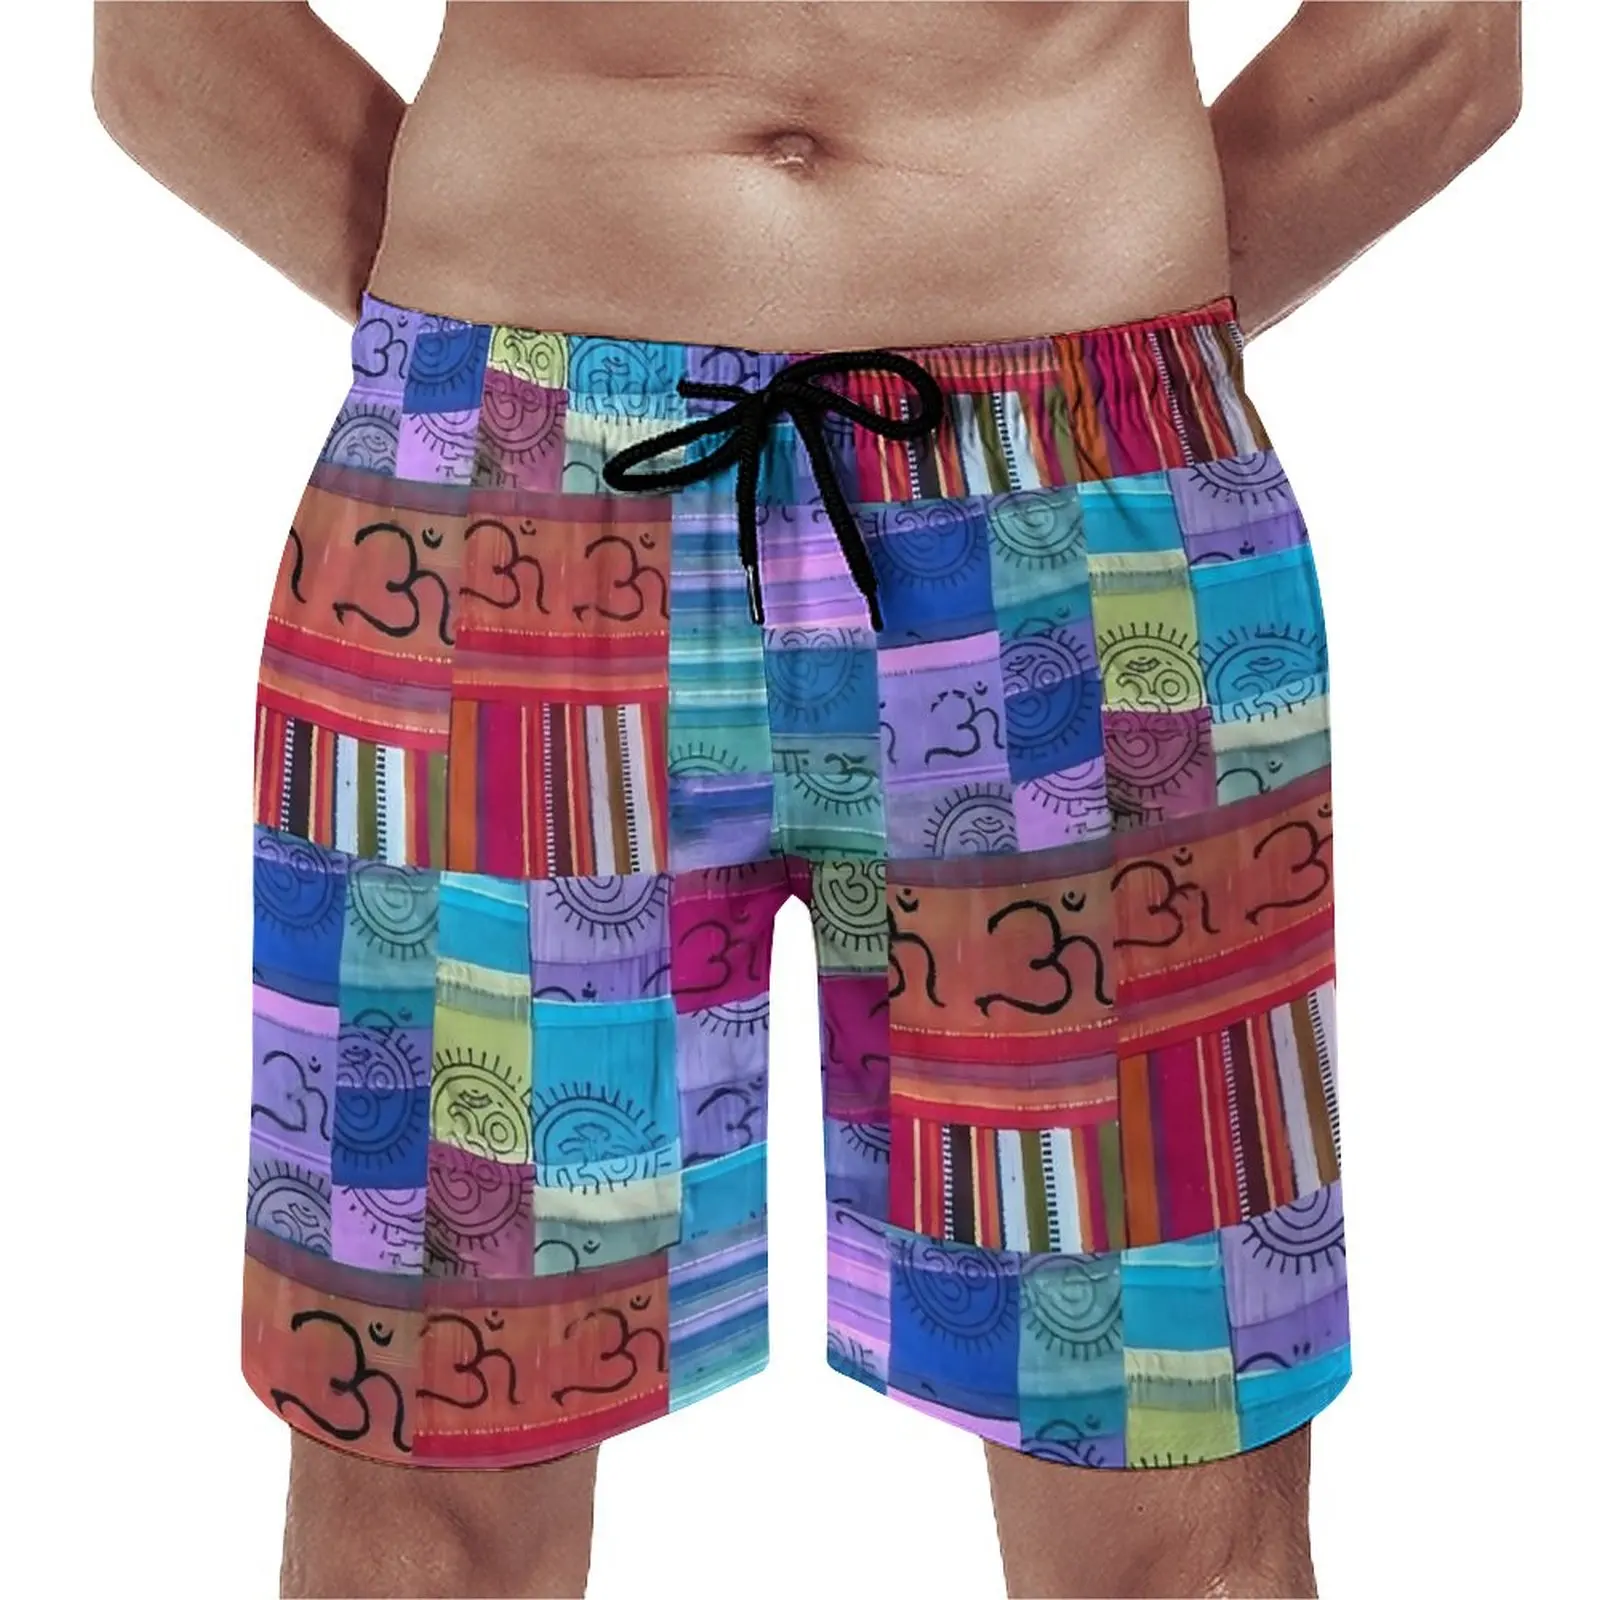 

Patchwork Print Board Shorts Vintage Design Beach Short Pants Males Graphic Surfing Quick Dry Swimming Trunks Birthday Present